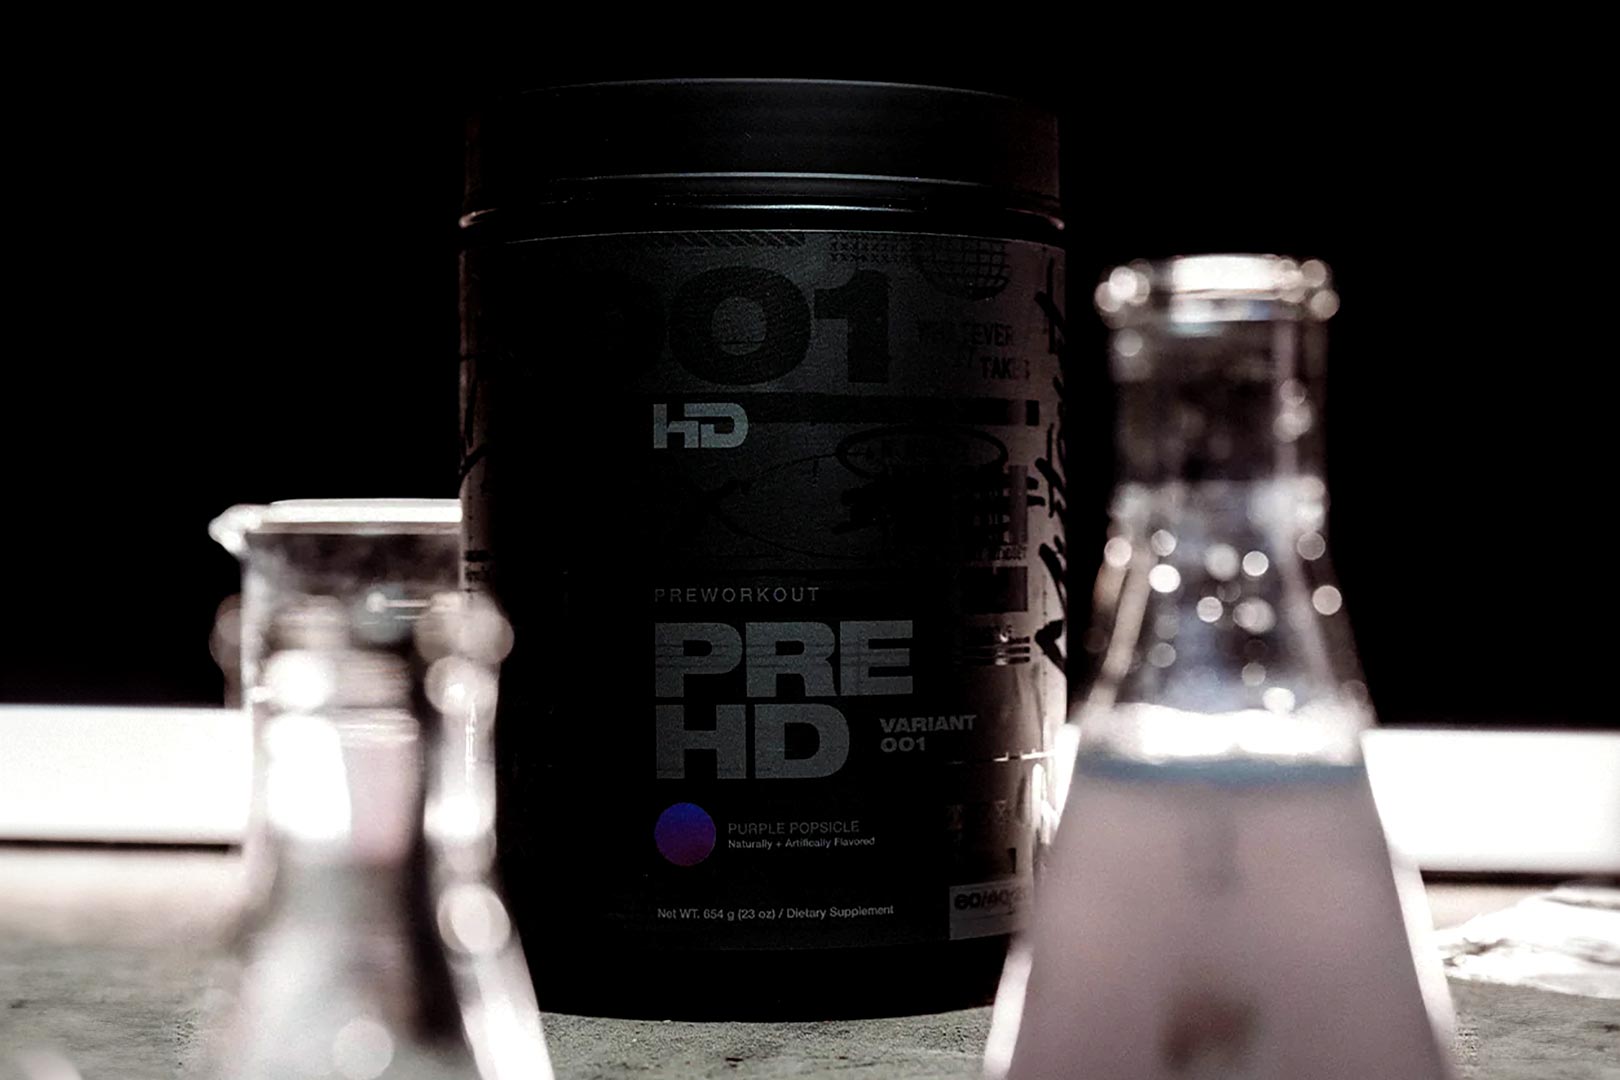 Hd Muscle X Nick Walker Prehd Variant Pre Workouts